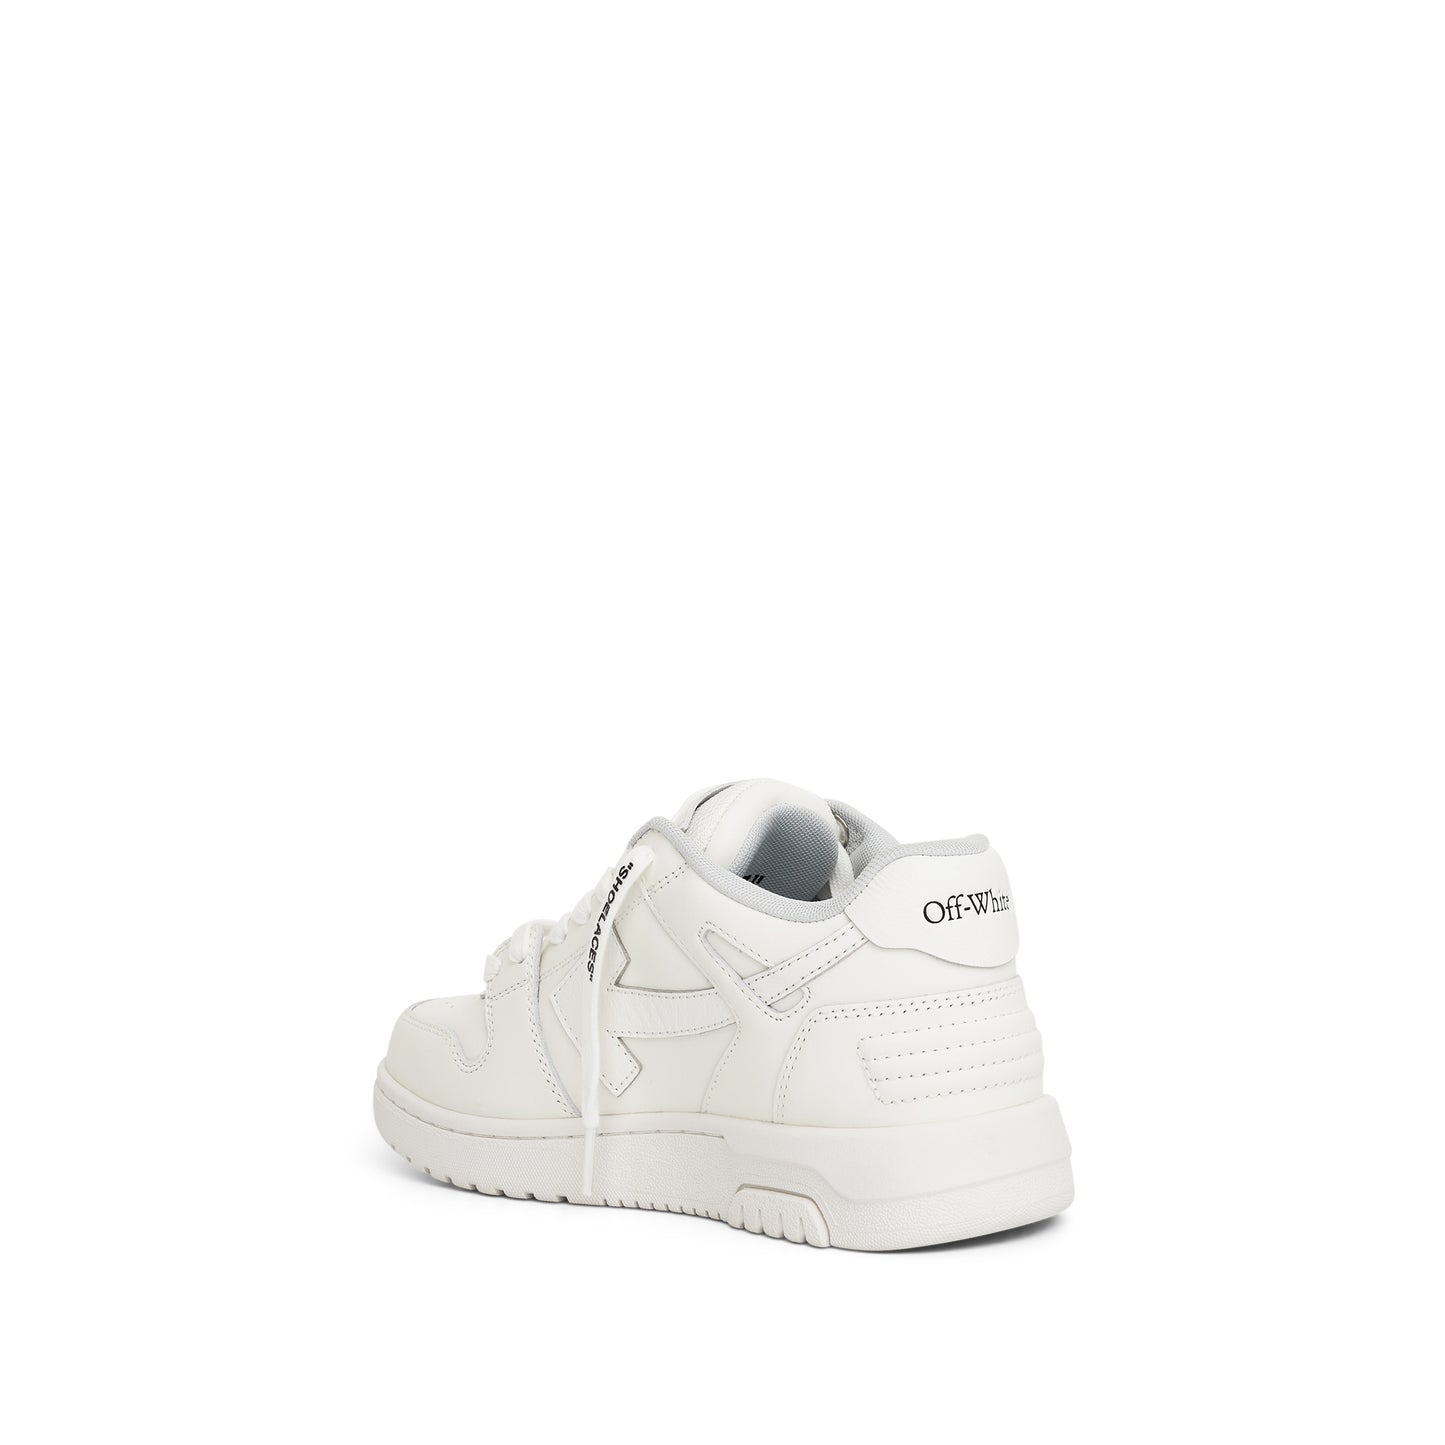 Out of Office "For WALKING" Leather Sneaker in White/Black